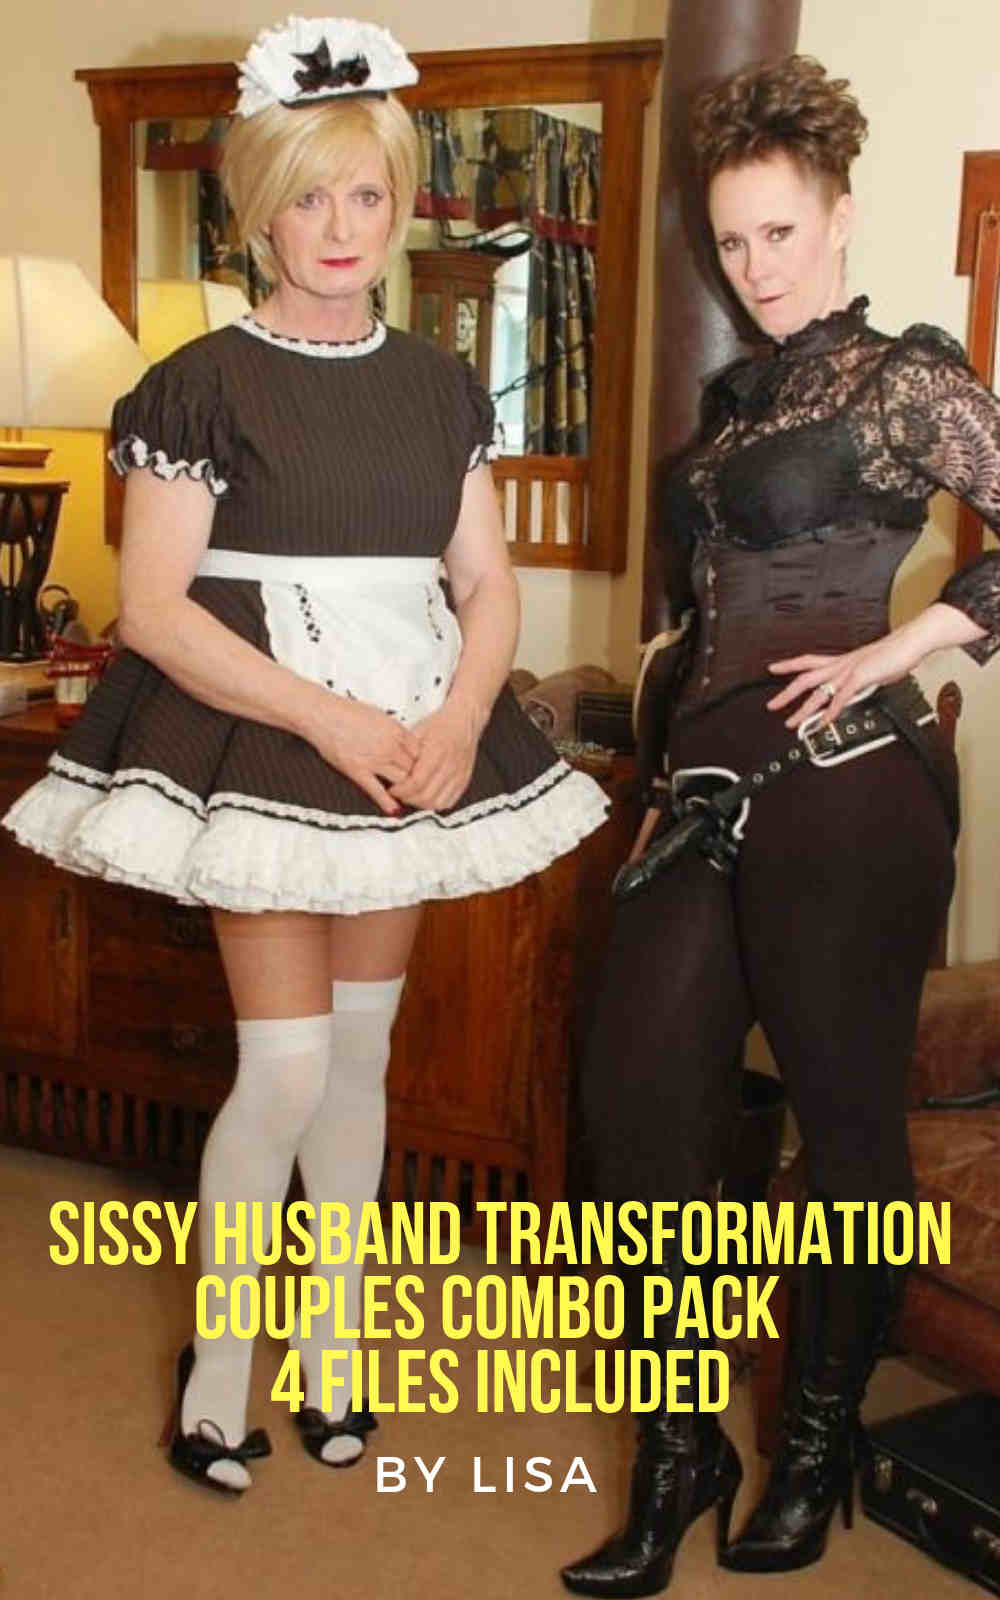 Sissy Husband Transformation Couples Combo Pack Femdom Training Femdom Hypnosis pic